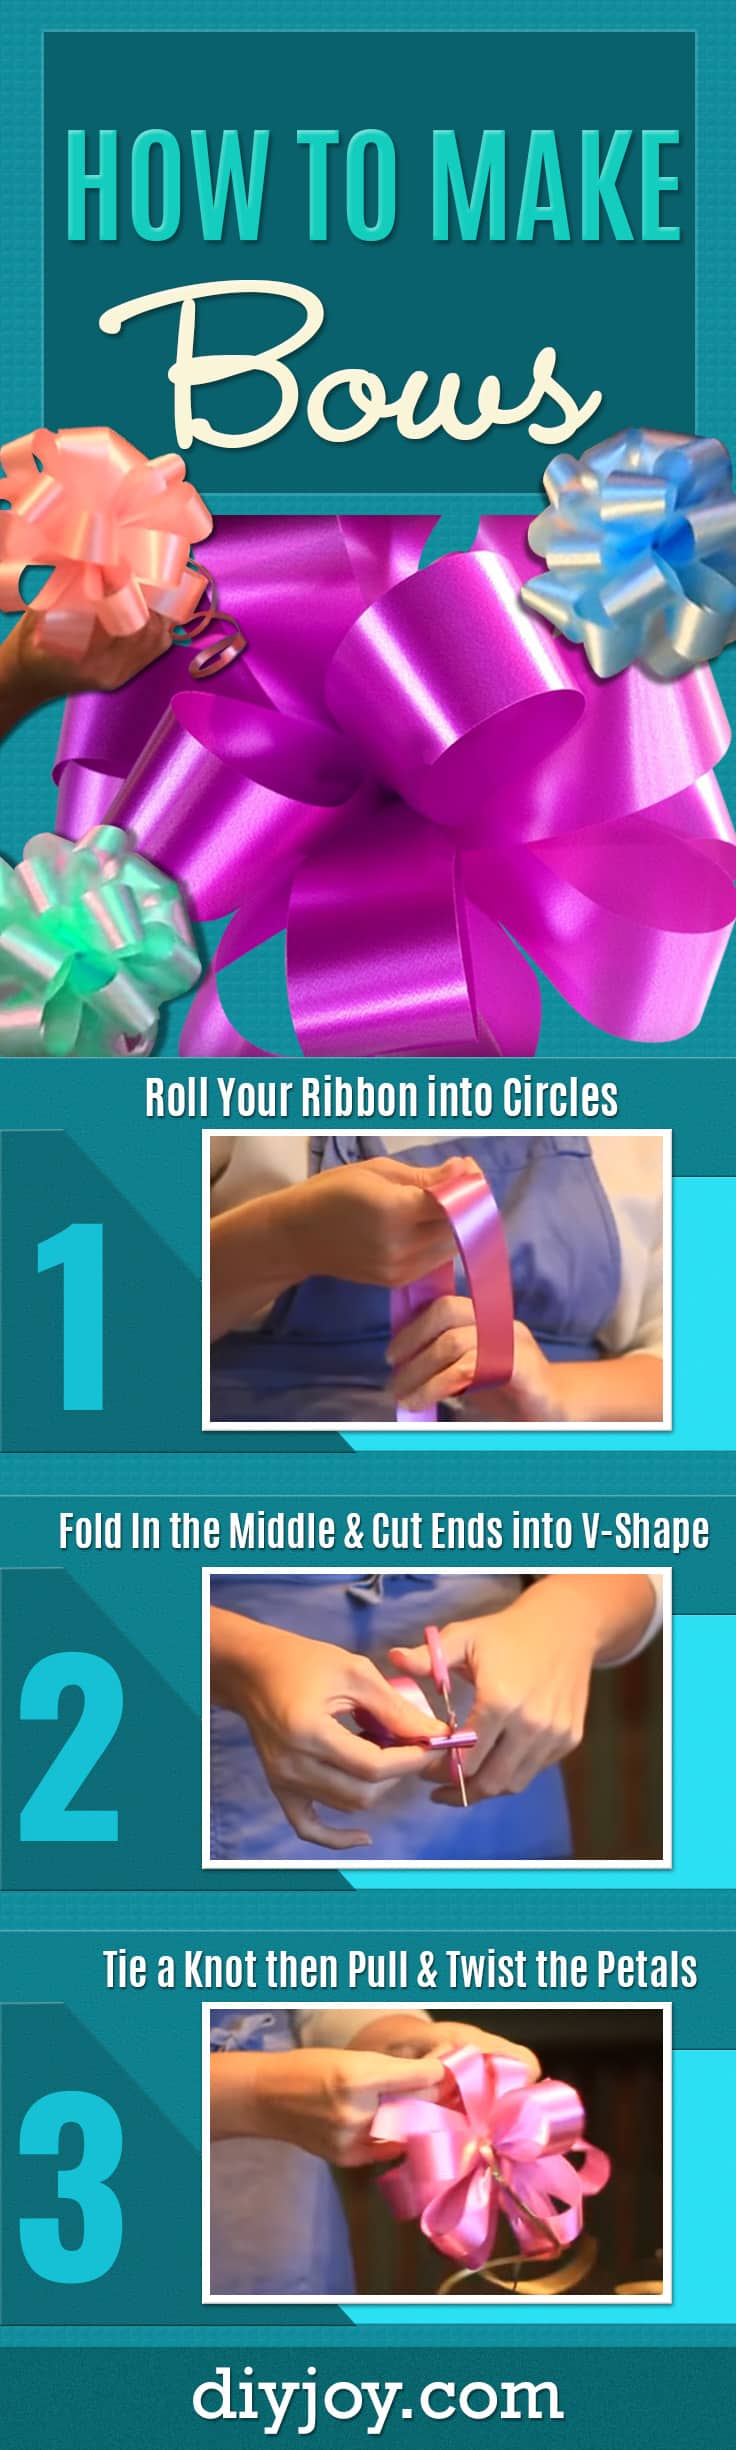 How To Make Bows - Learn How To Tie a Bow for DIY Christmas Presents and Holiday Gifts - Easy Bow Making Tutorial with Step by Step Instructions and Video - Gift Wrapping Made Simple With Big, Beautiful Bows - Creative Crafts and DIY Projects